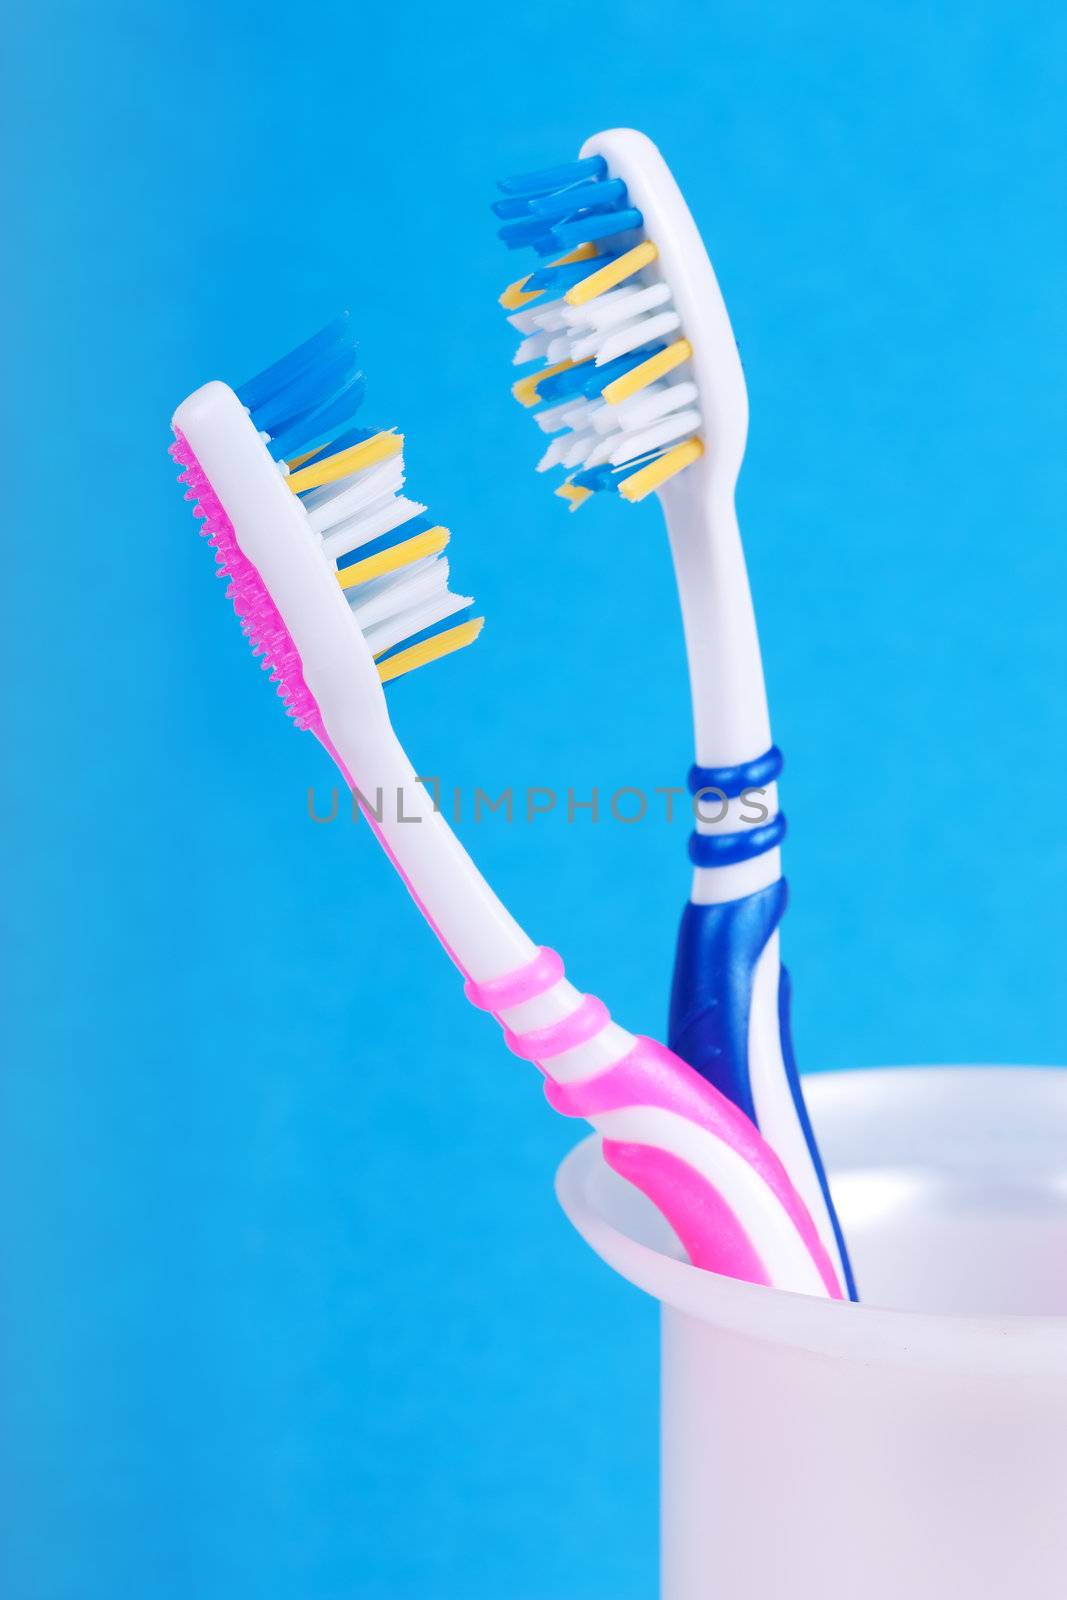 A couple of toothbrushes over blue background